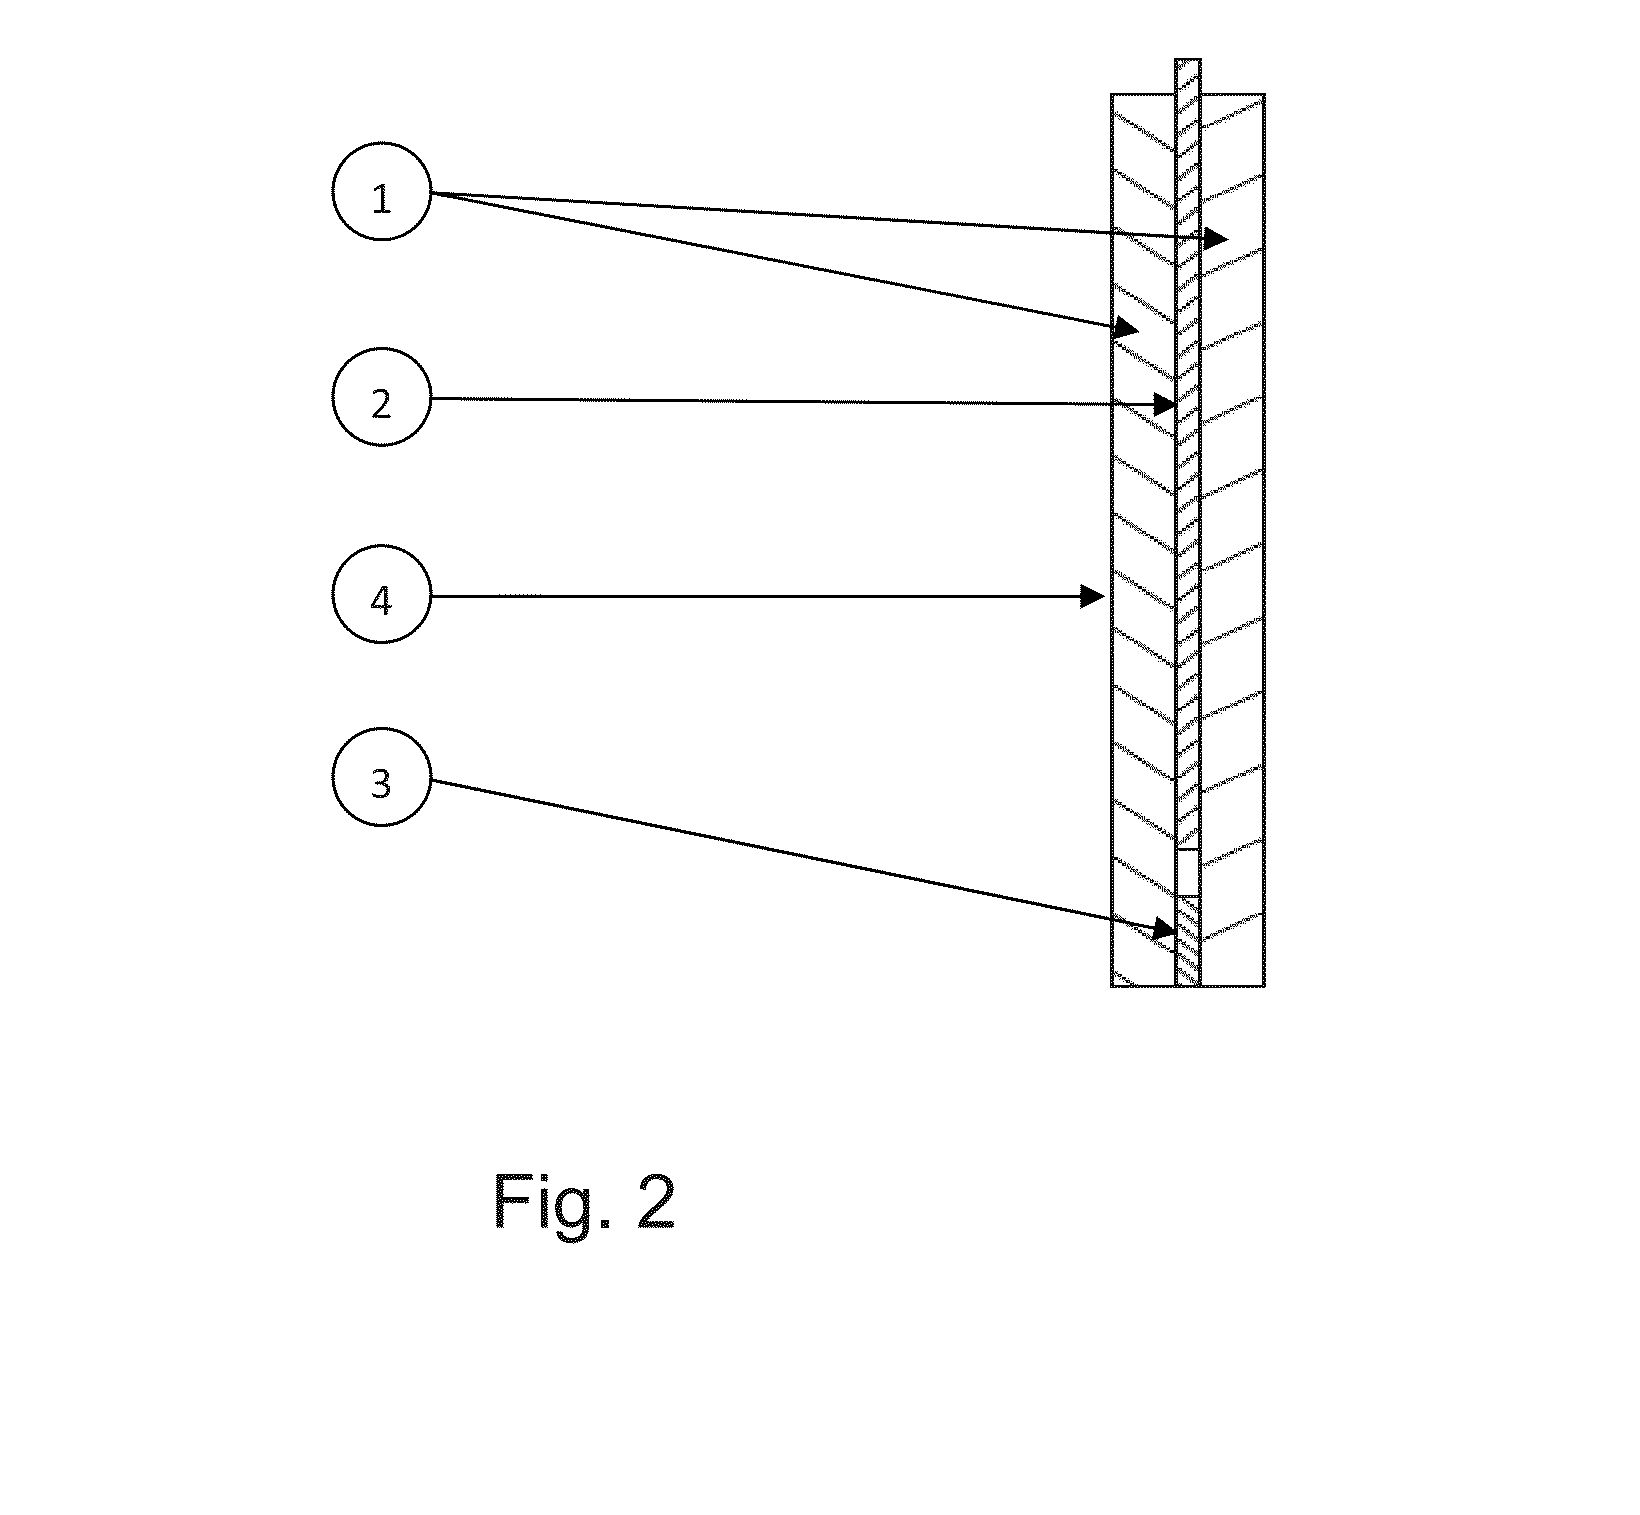 Arc Chute Arrangement for Arc Quenching in Electrical Switching Device